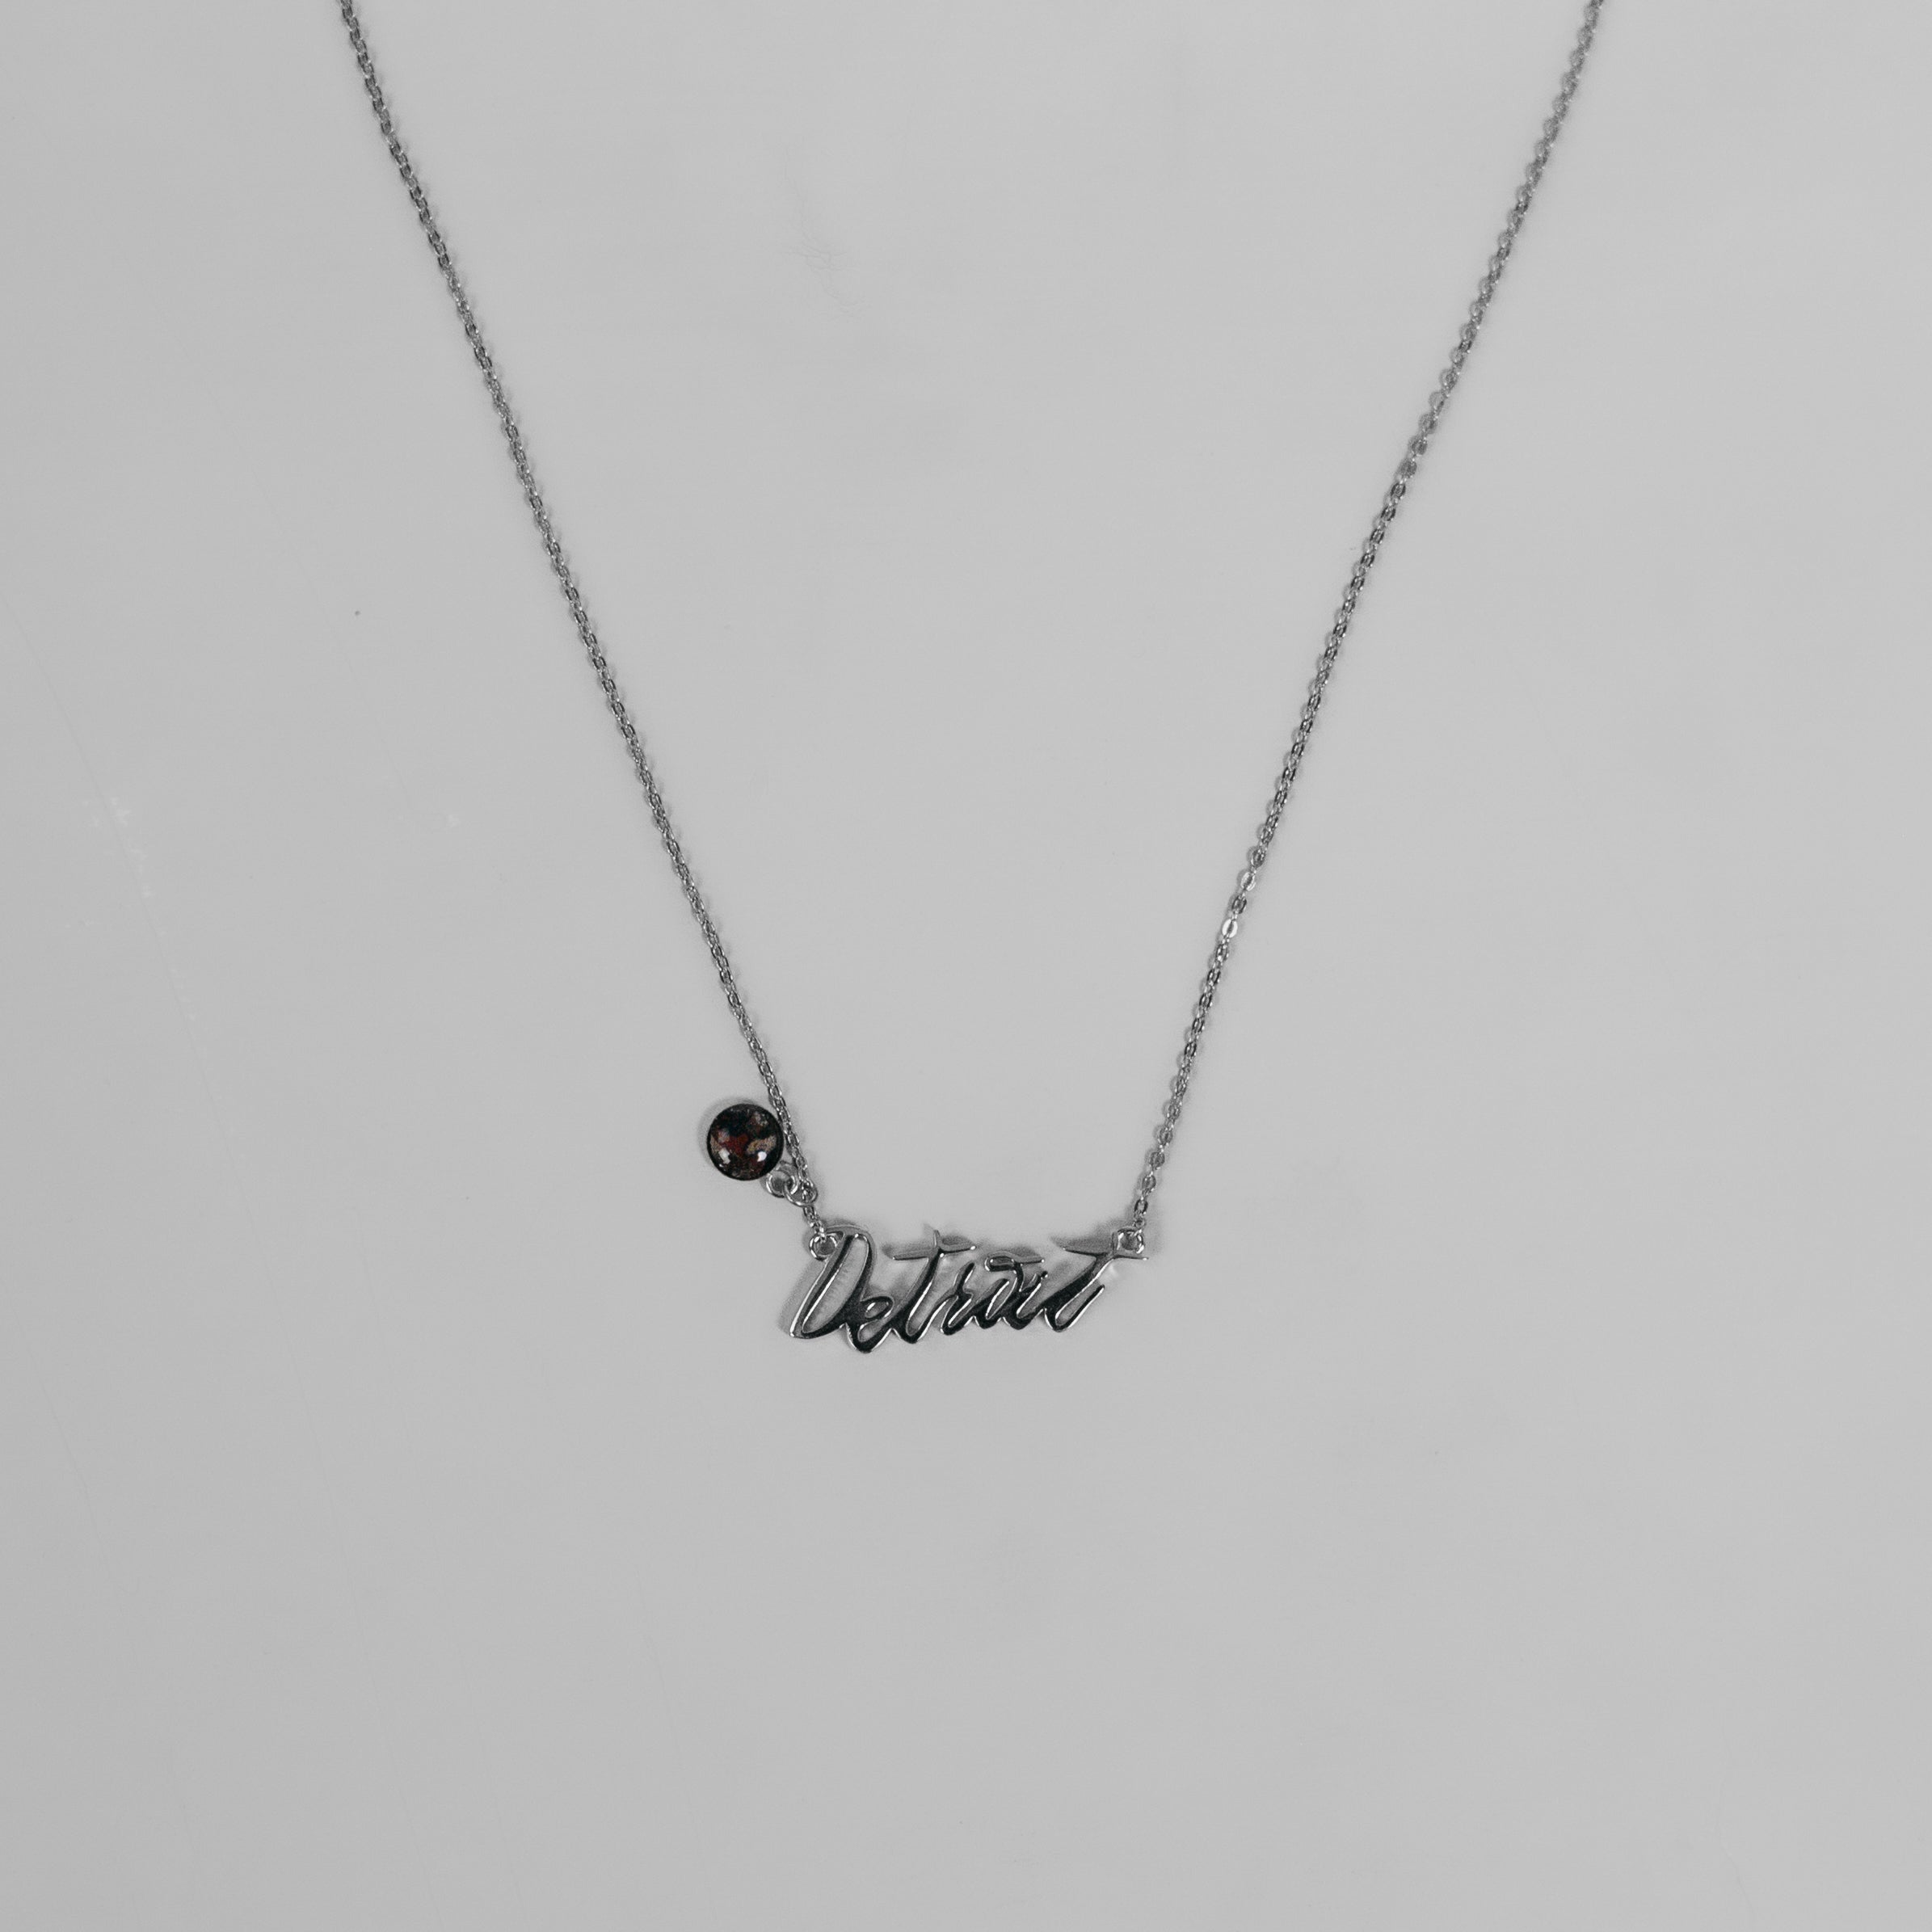 Rebel Nell x Hagerty Detroit Necklace